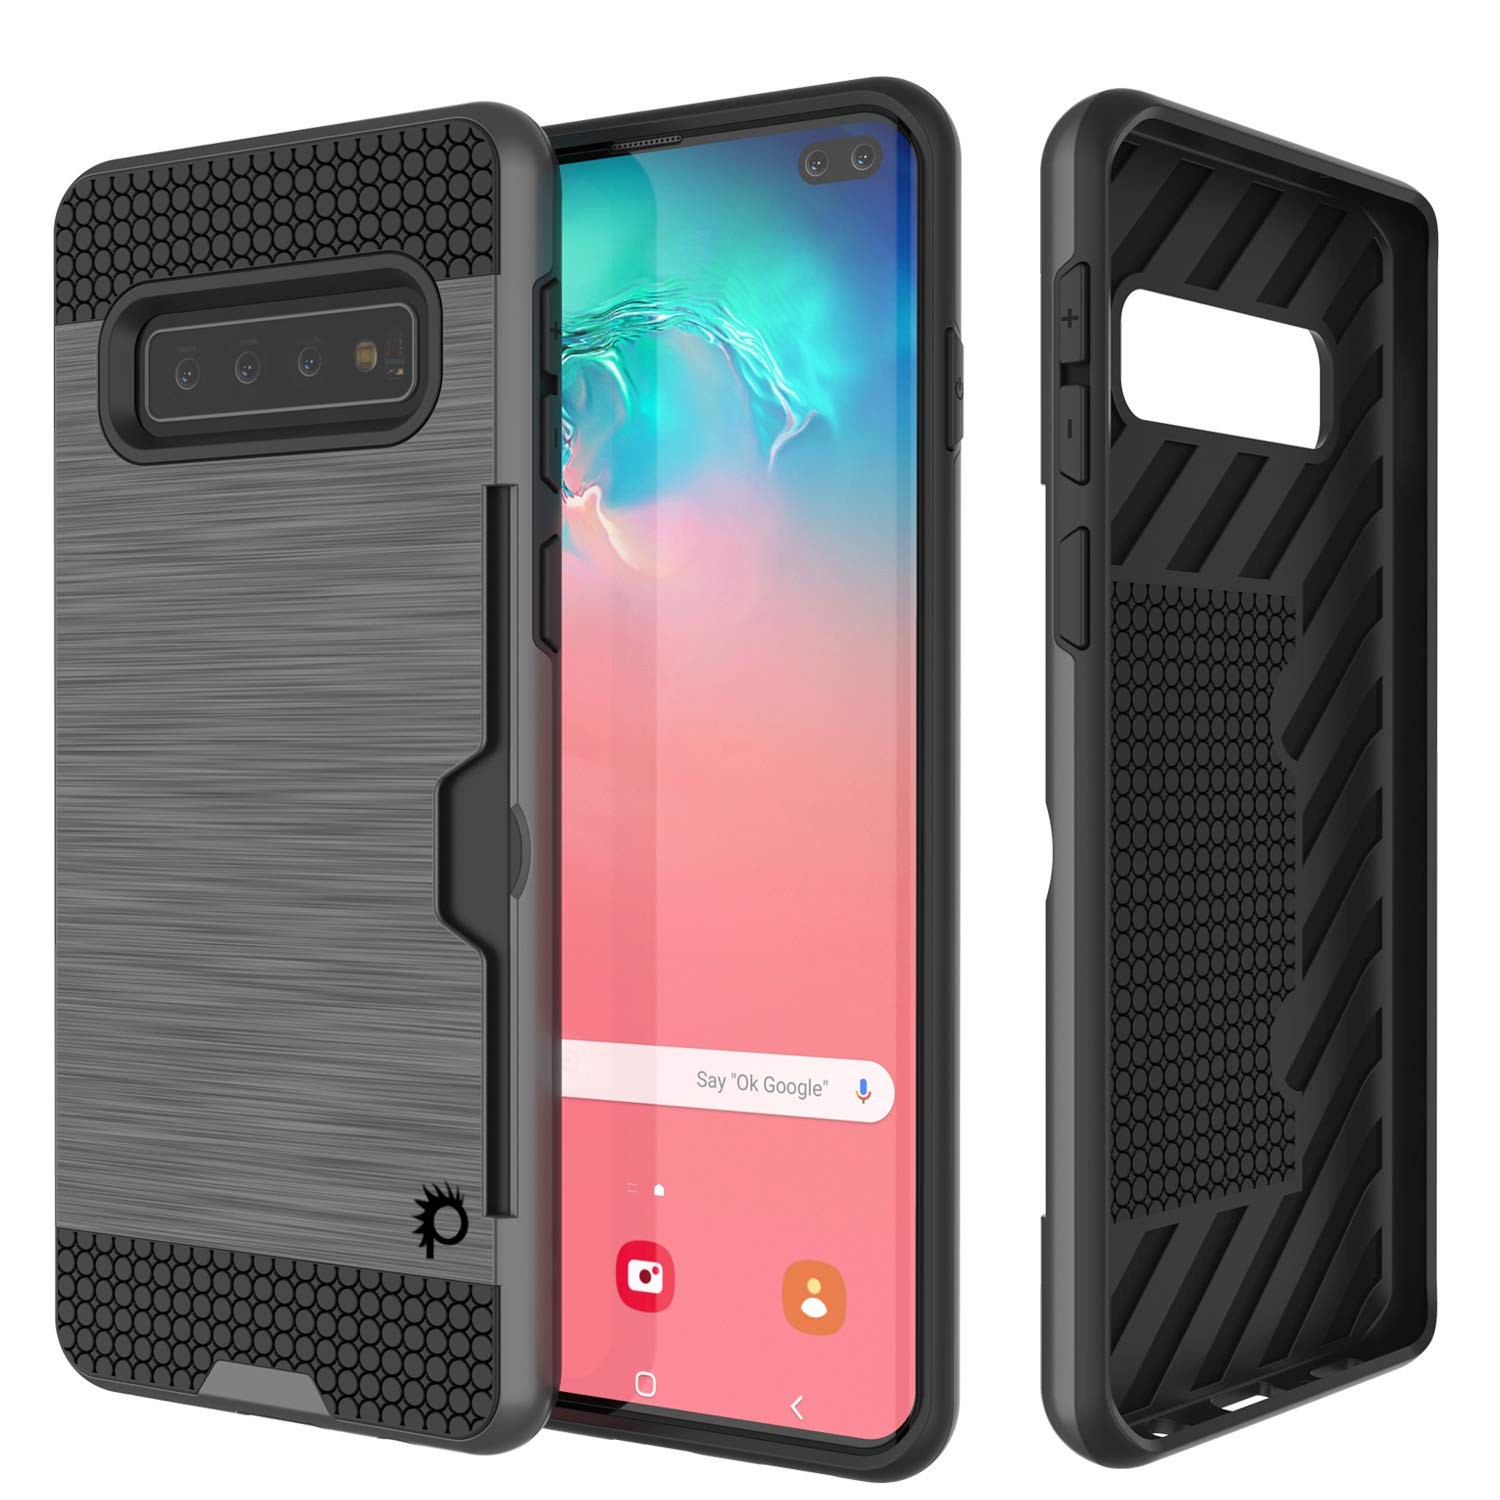 Galaxy S10+ Plus  Case, PUNKcase [SLOT Series] [Slim Fit] Dual-Layer Armor Cover w/Integrated Anti-Shock System, Credit Card Slot [Grey]